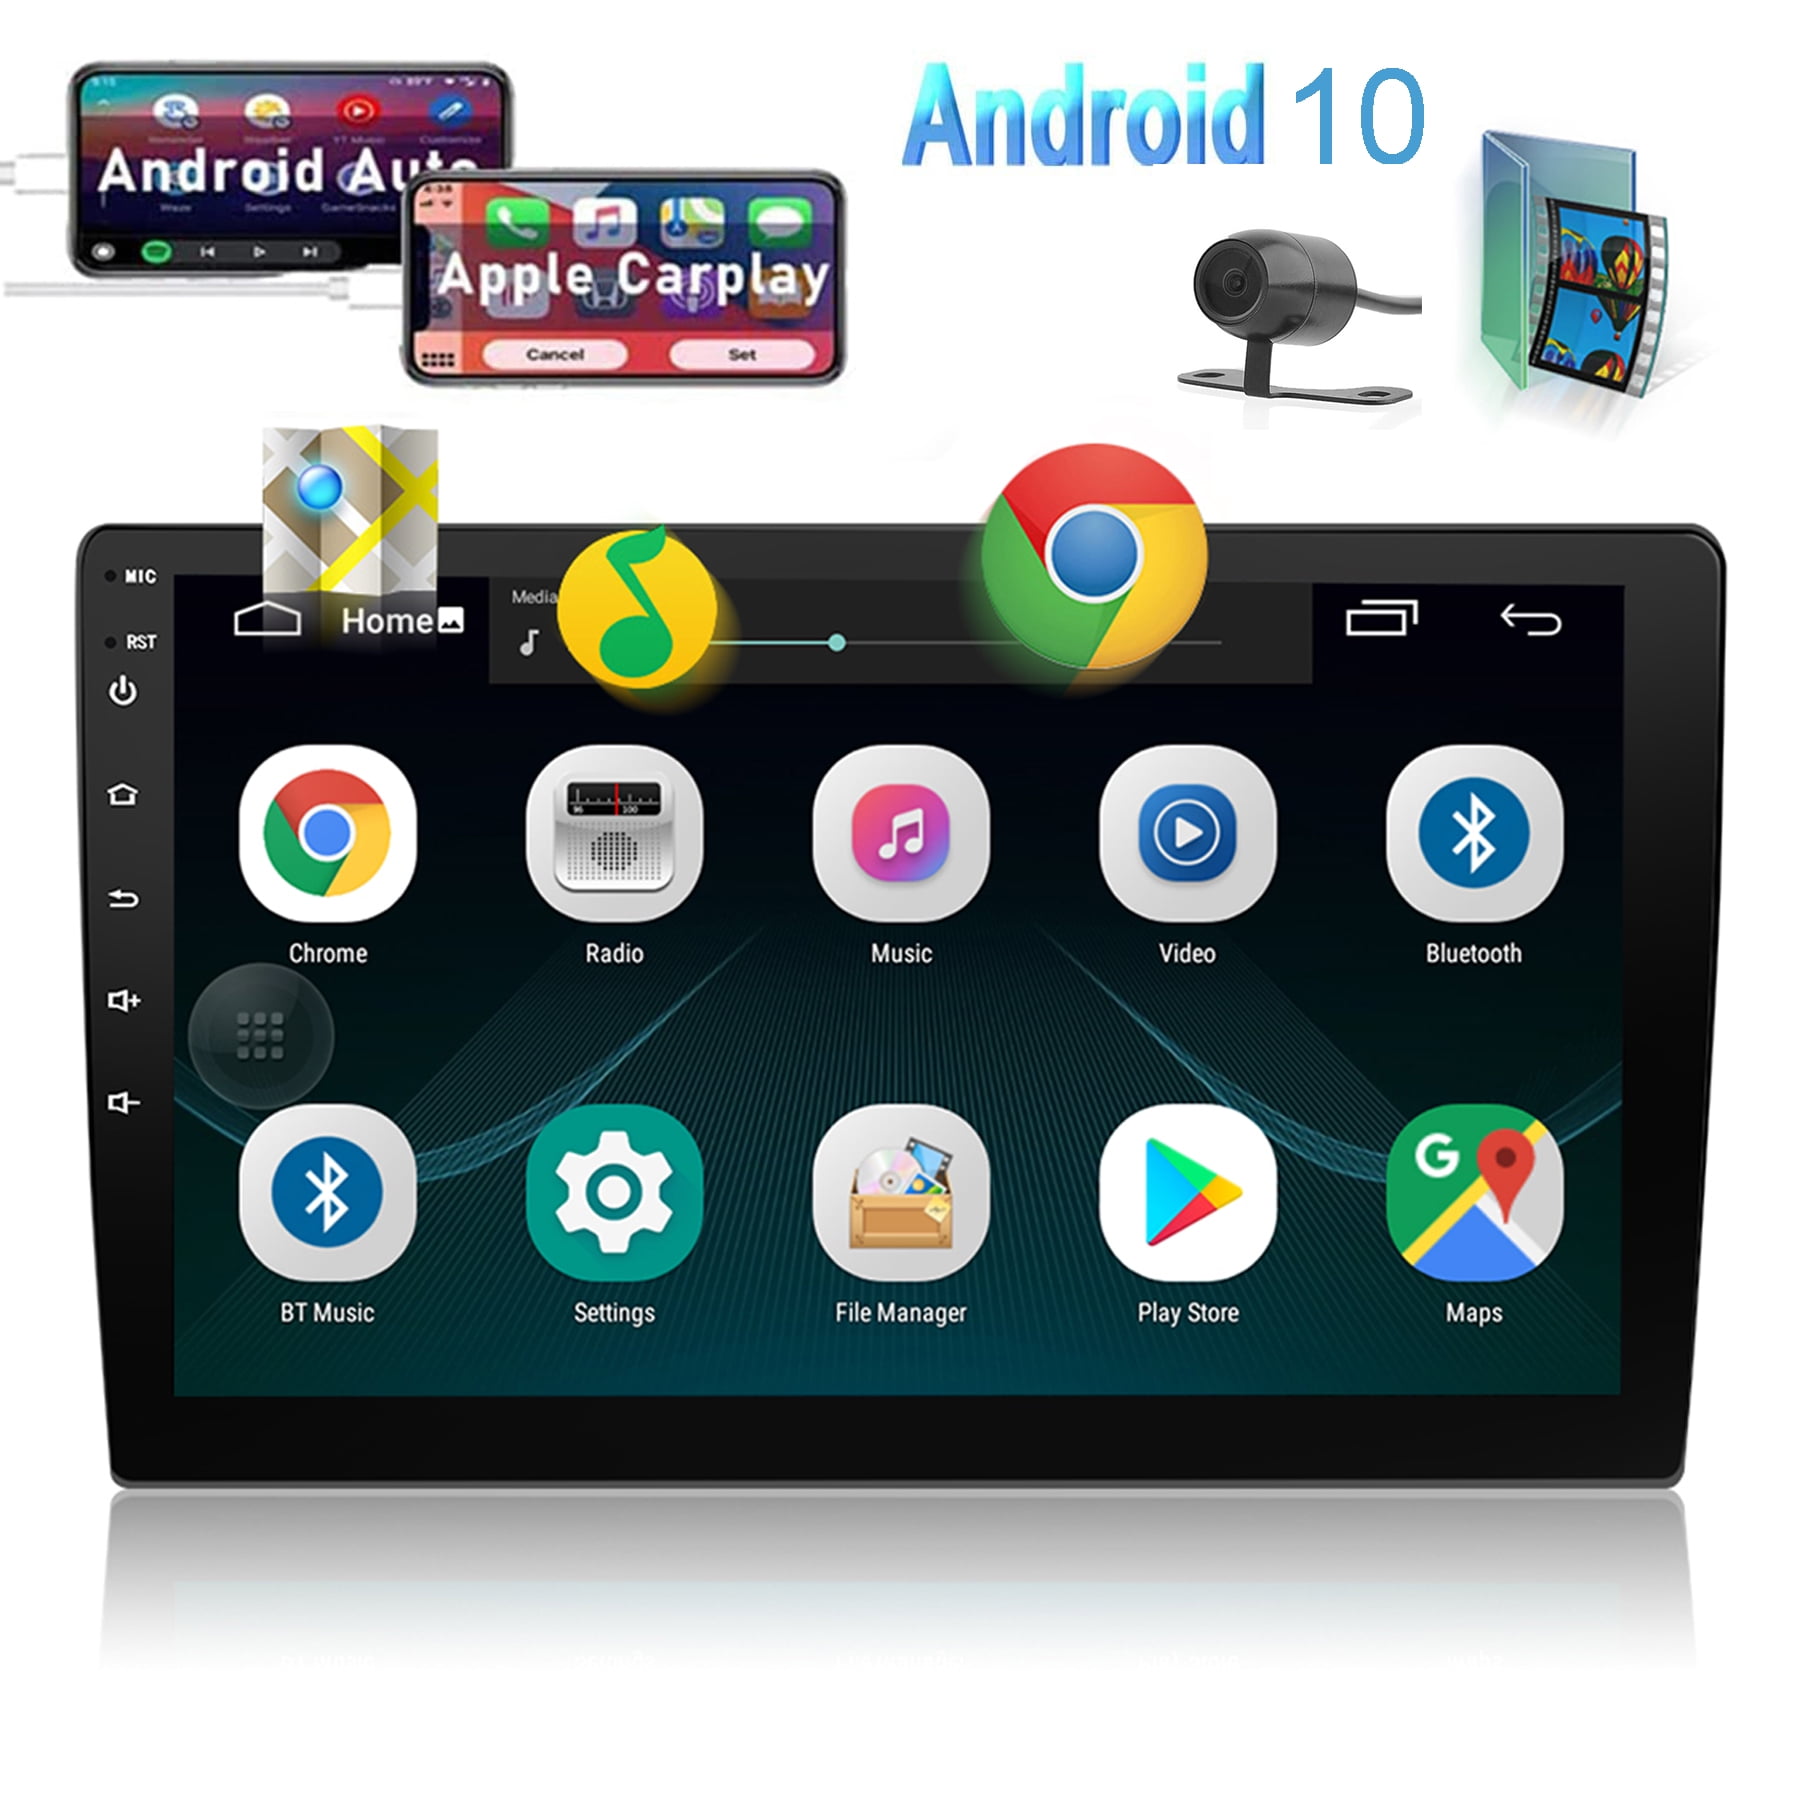 10.1 Inch Android 10 Stereo with Apple Carplay Double Din Android Auto unit GPS Navigation Touchscreen Car Autoradio Bluetooth WiFi Mirroring + Free Backup - Walmart.com